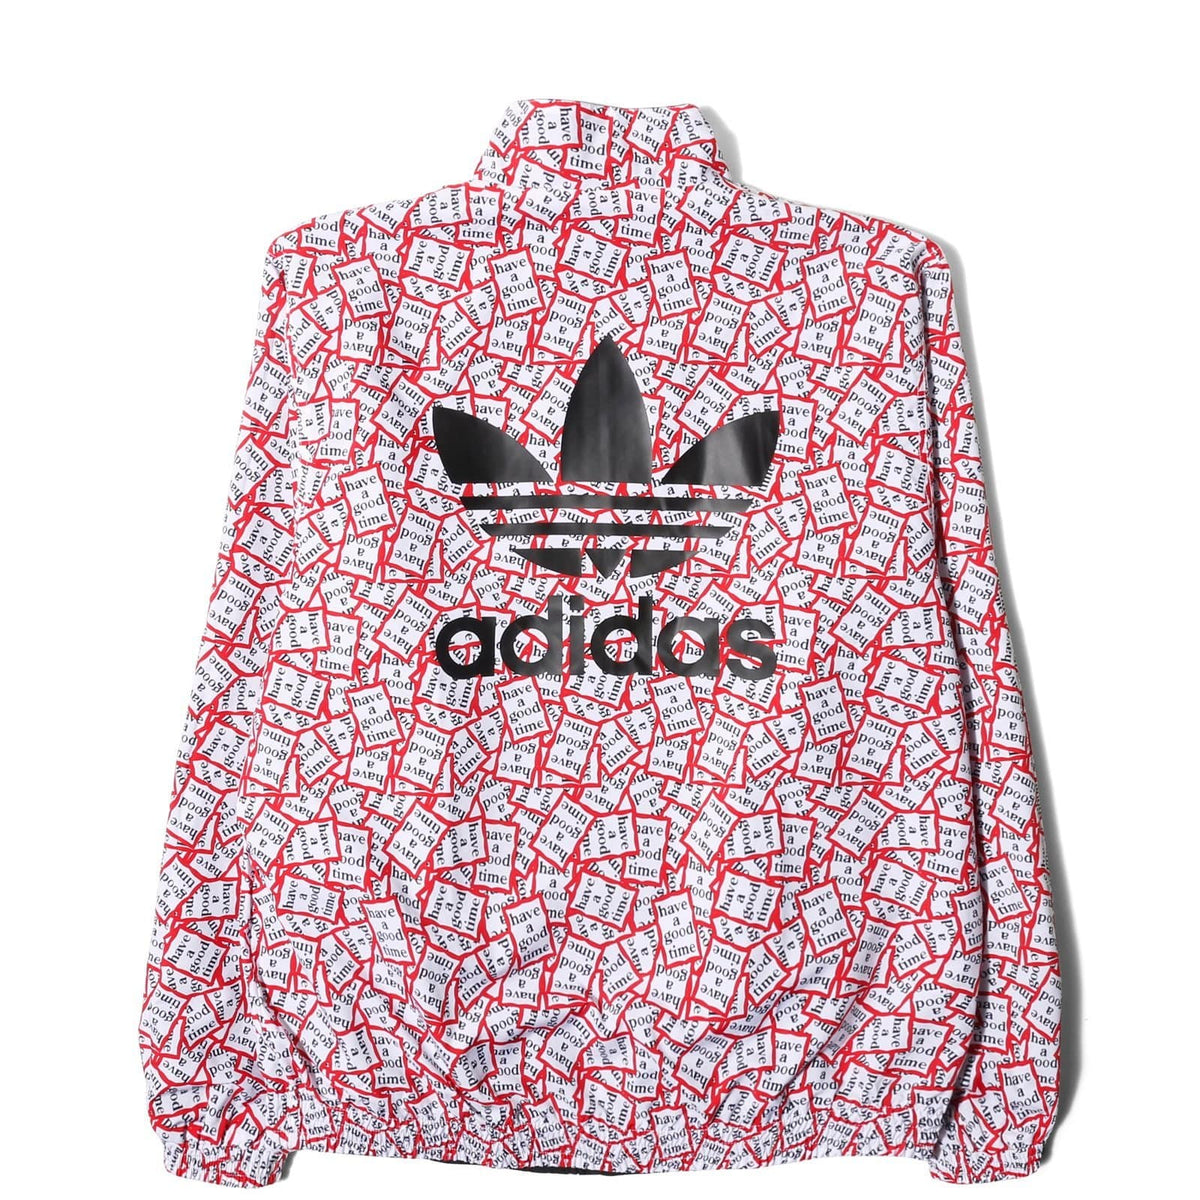 adidas have a good time track top